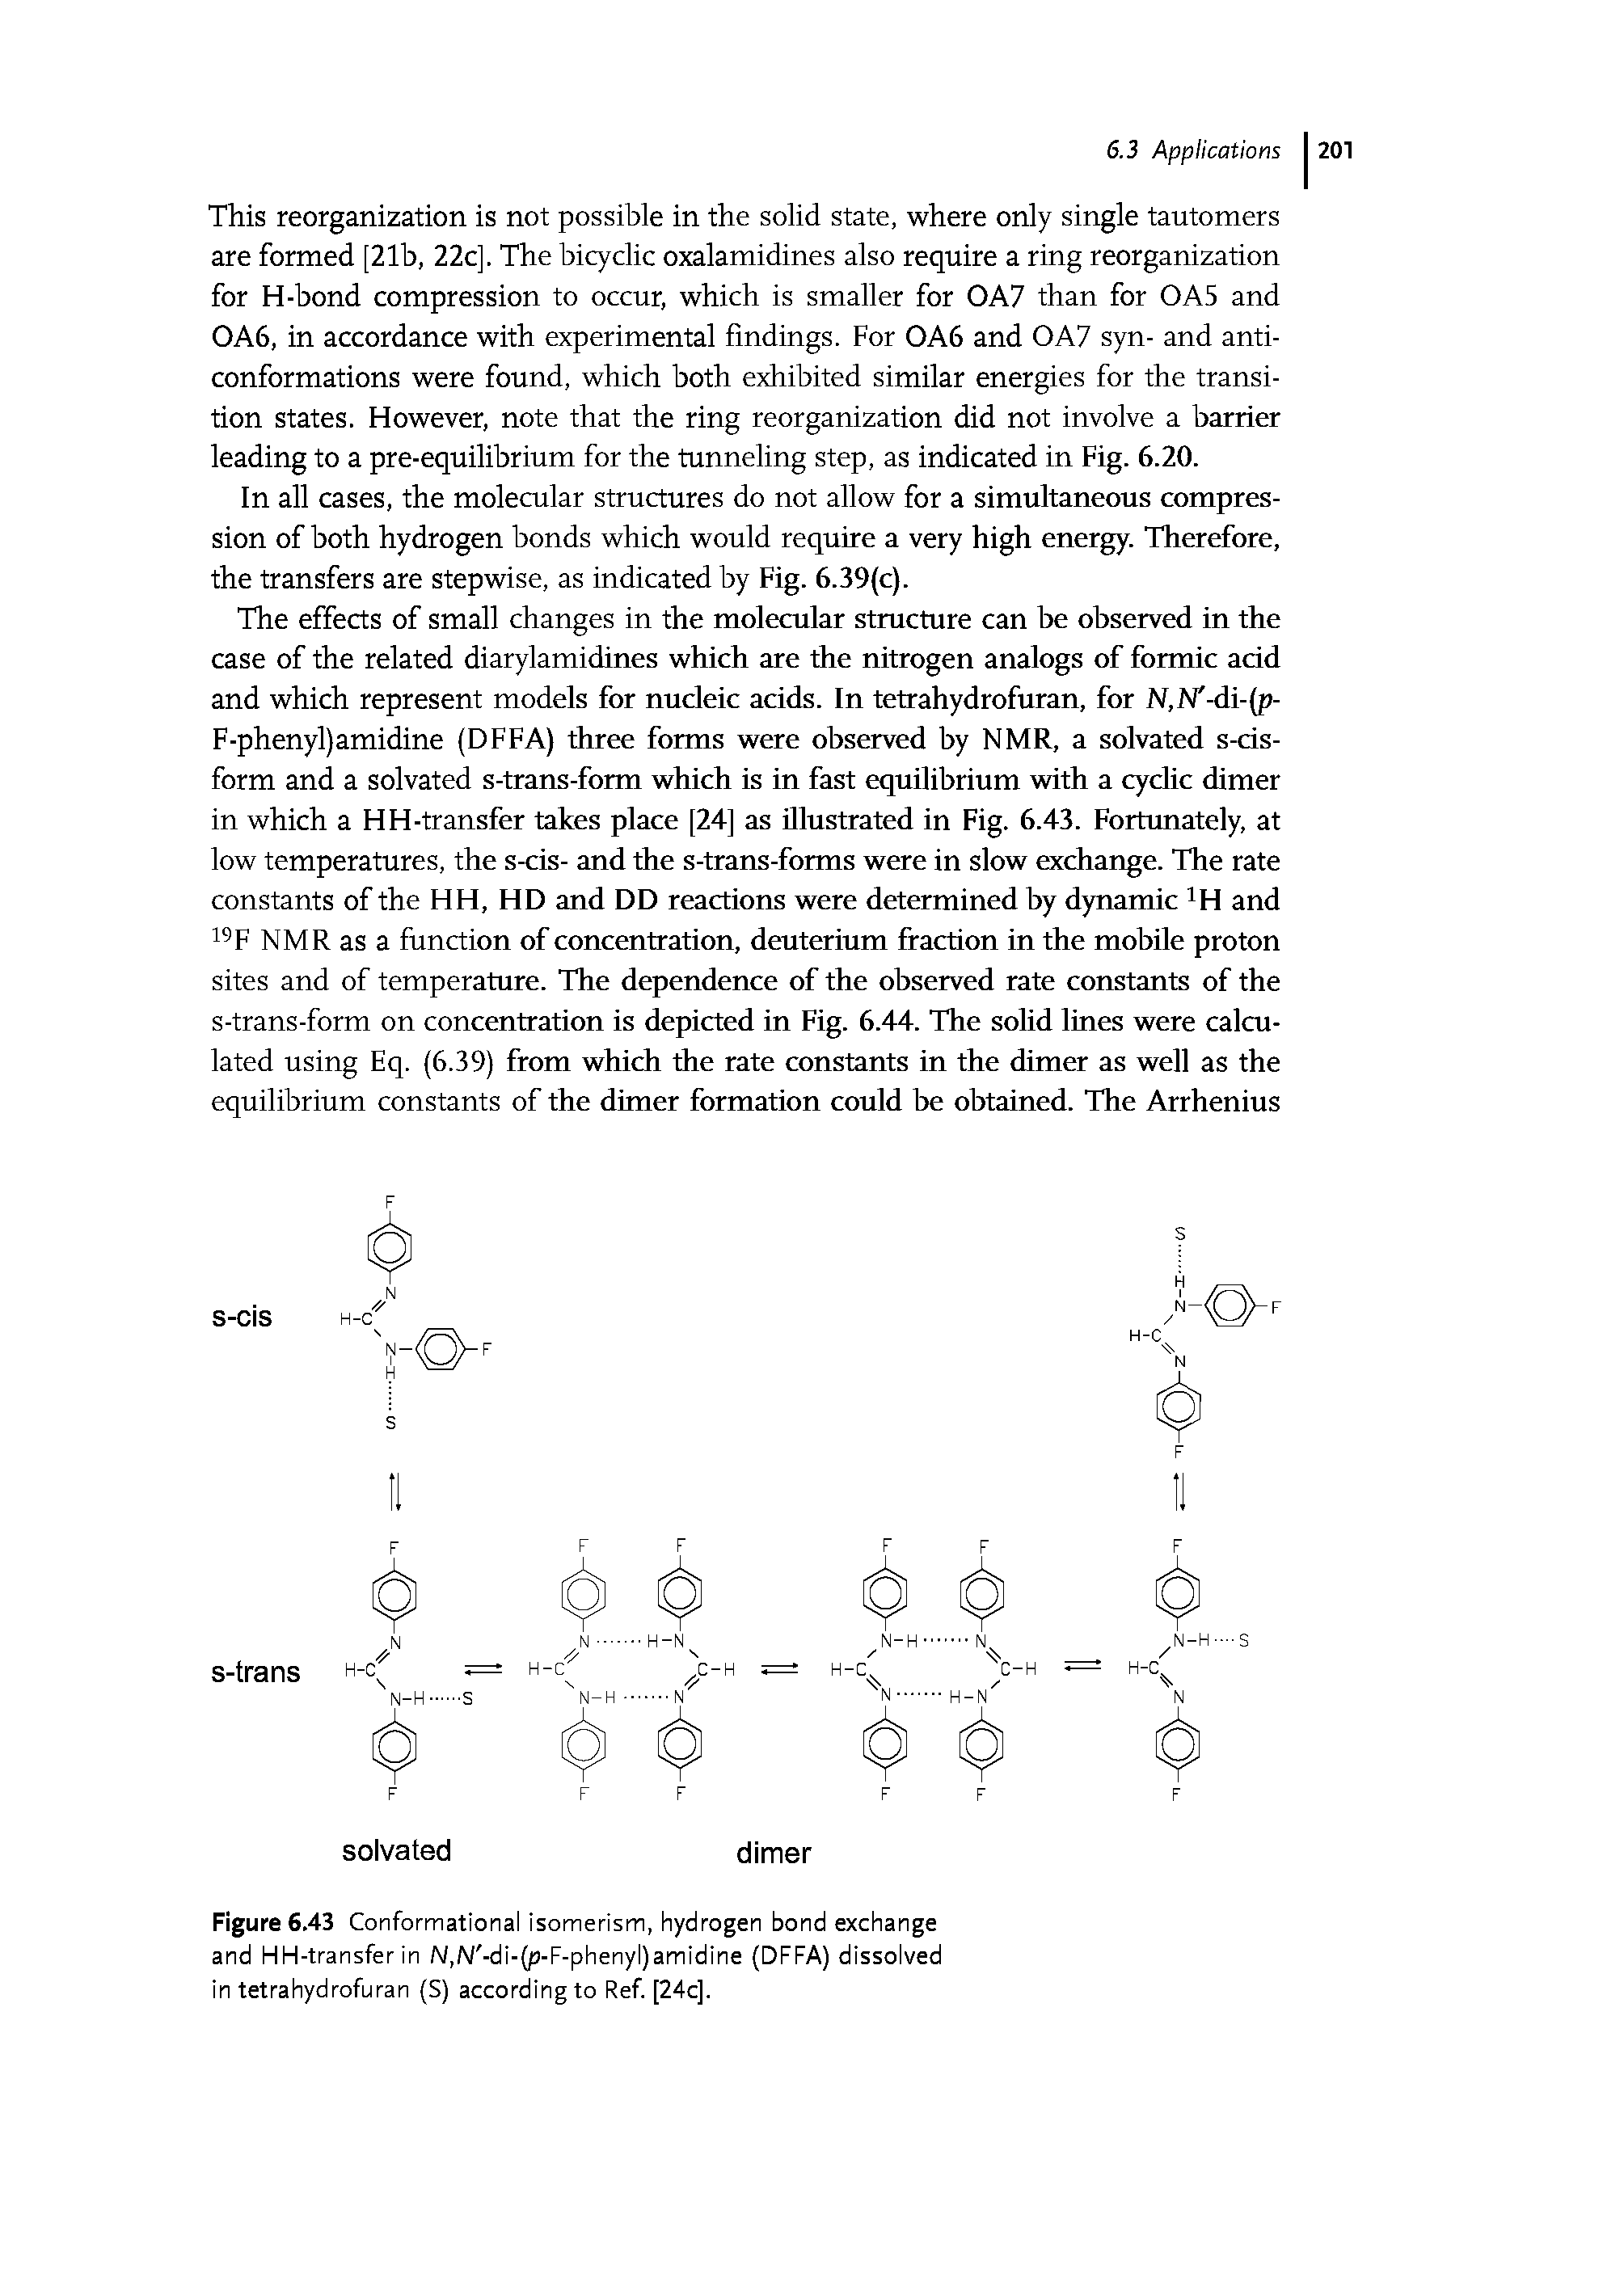 Figure 6.43 Conformational isomerism, hydrogen bond exchange and HH-transfer in N,N -di-(p-F-phenyl)amidine (DFFA) dissolved in tetrahydrofuran (S) according to Ref [24cj.